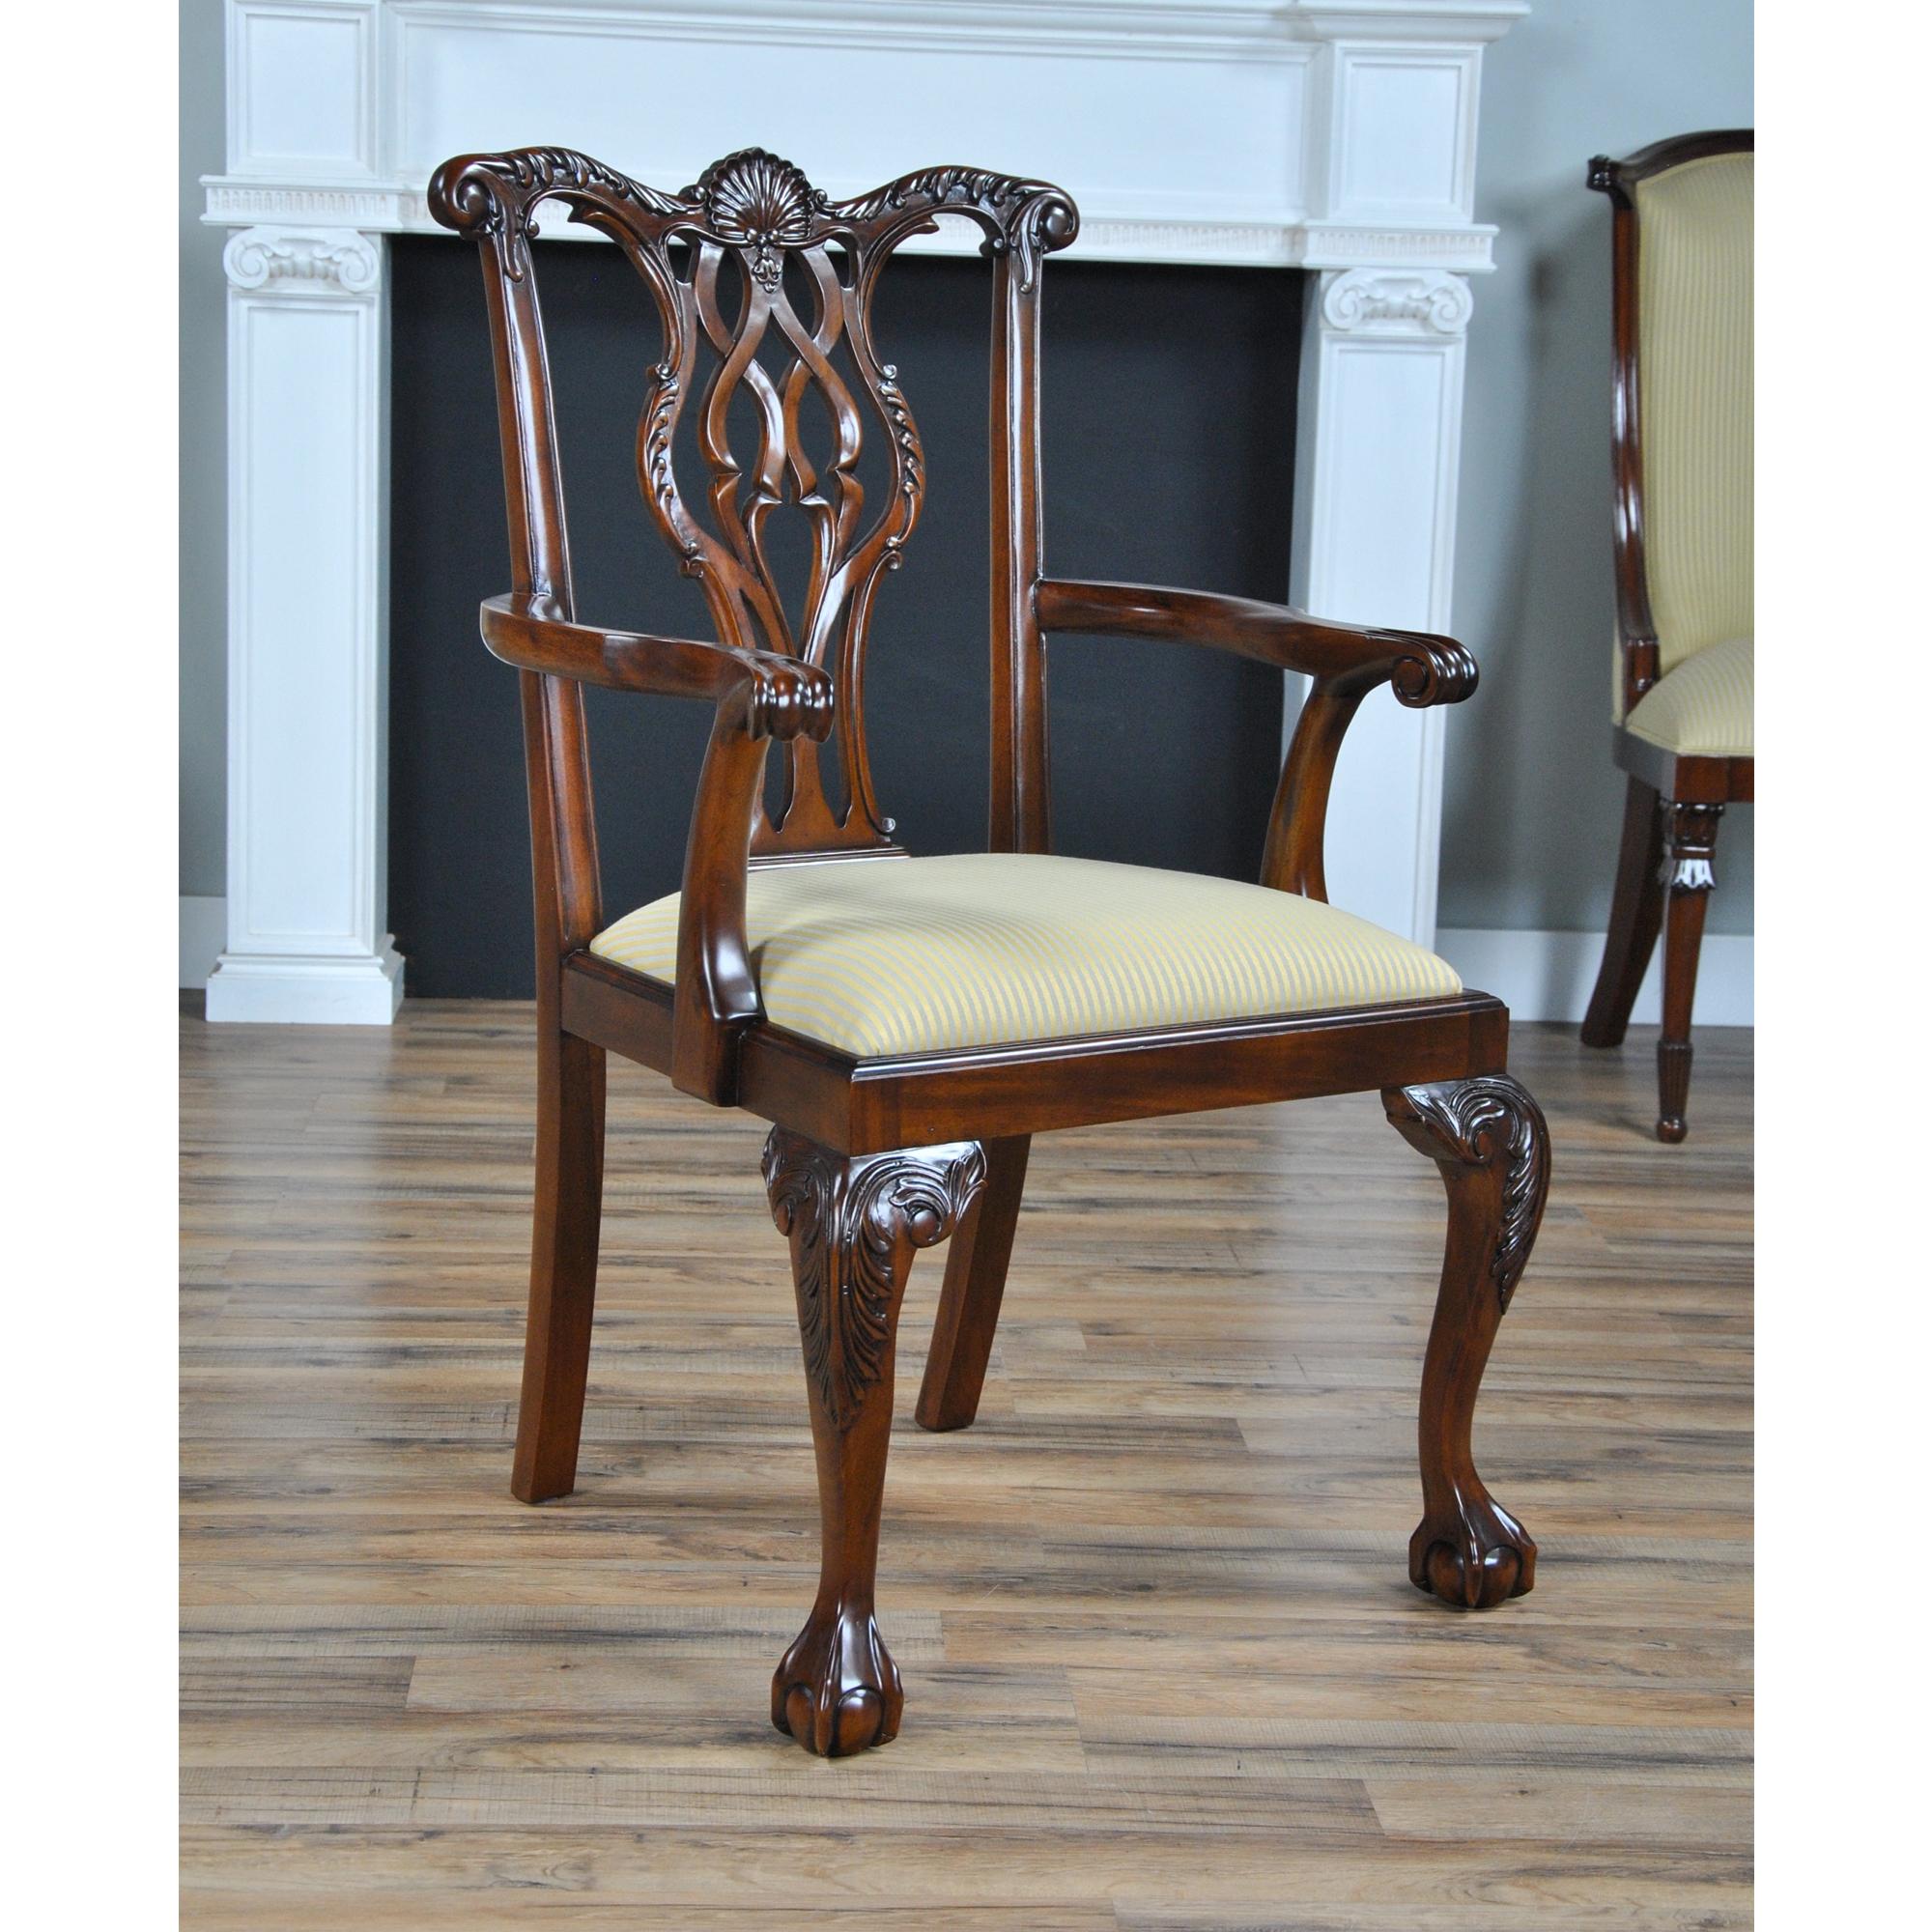 The set of 10 Shellback Mahogany Dining Chairs, are a high end solid mahogany Chippendale style chair with a serpentine top crest rail that boasts a carved clam shell and scrolled acanthus foliage carvings above a similarly carved and pierced back